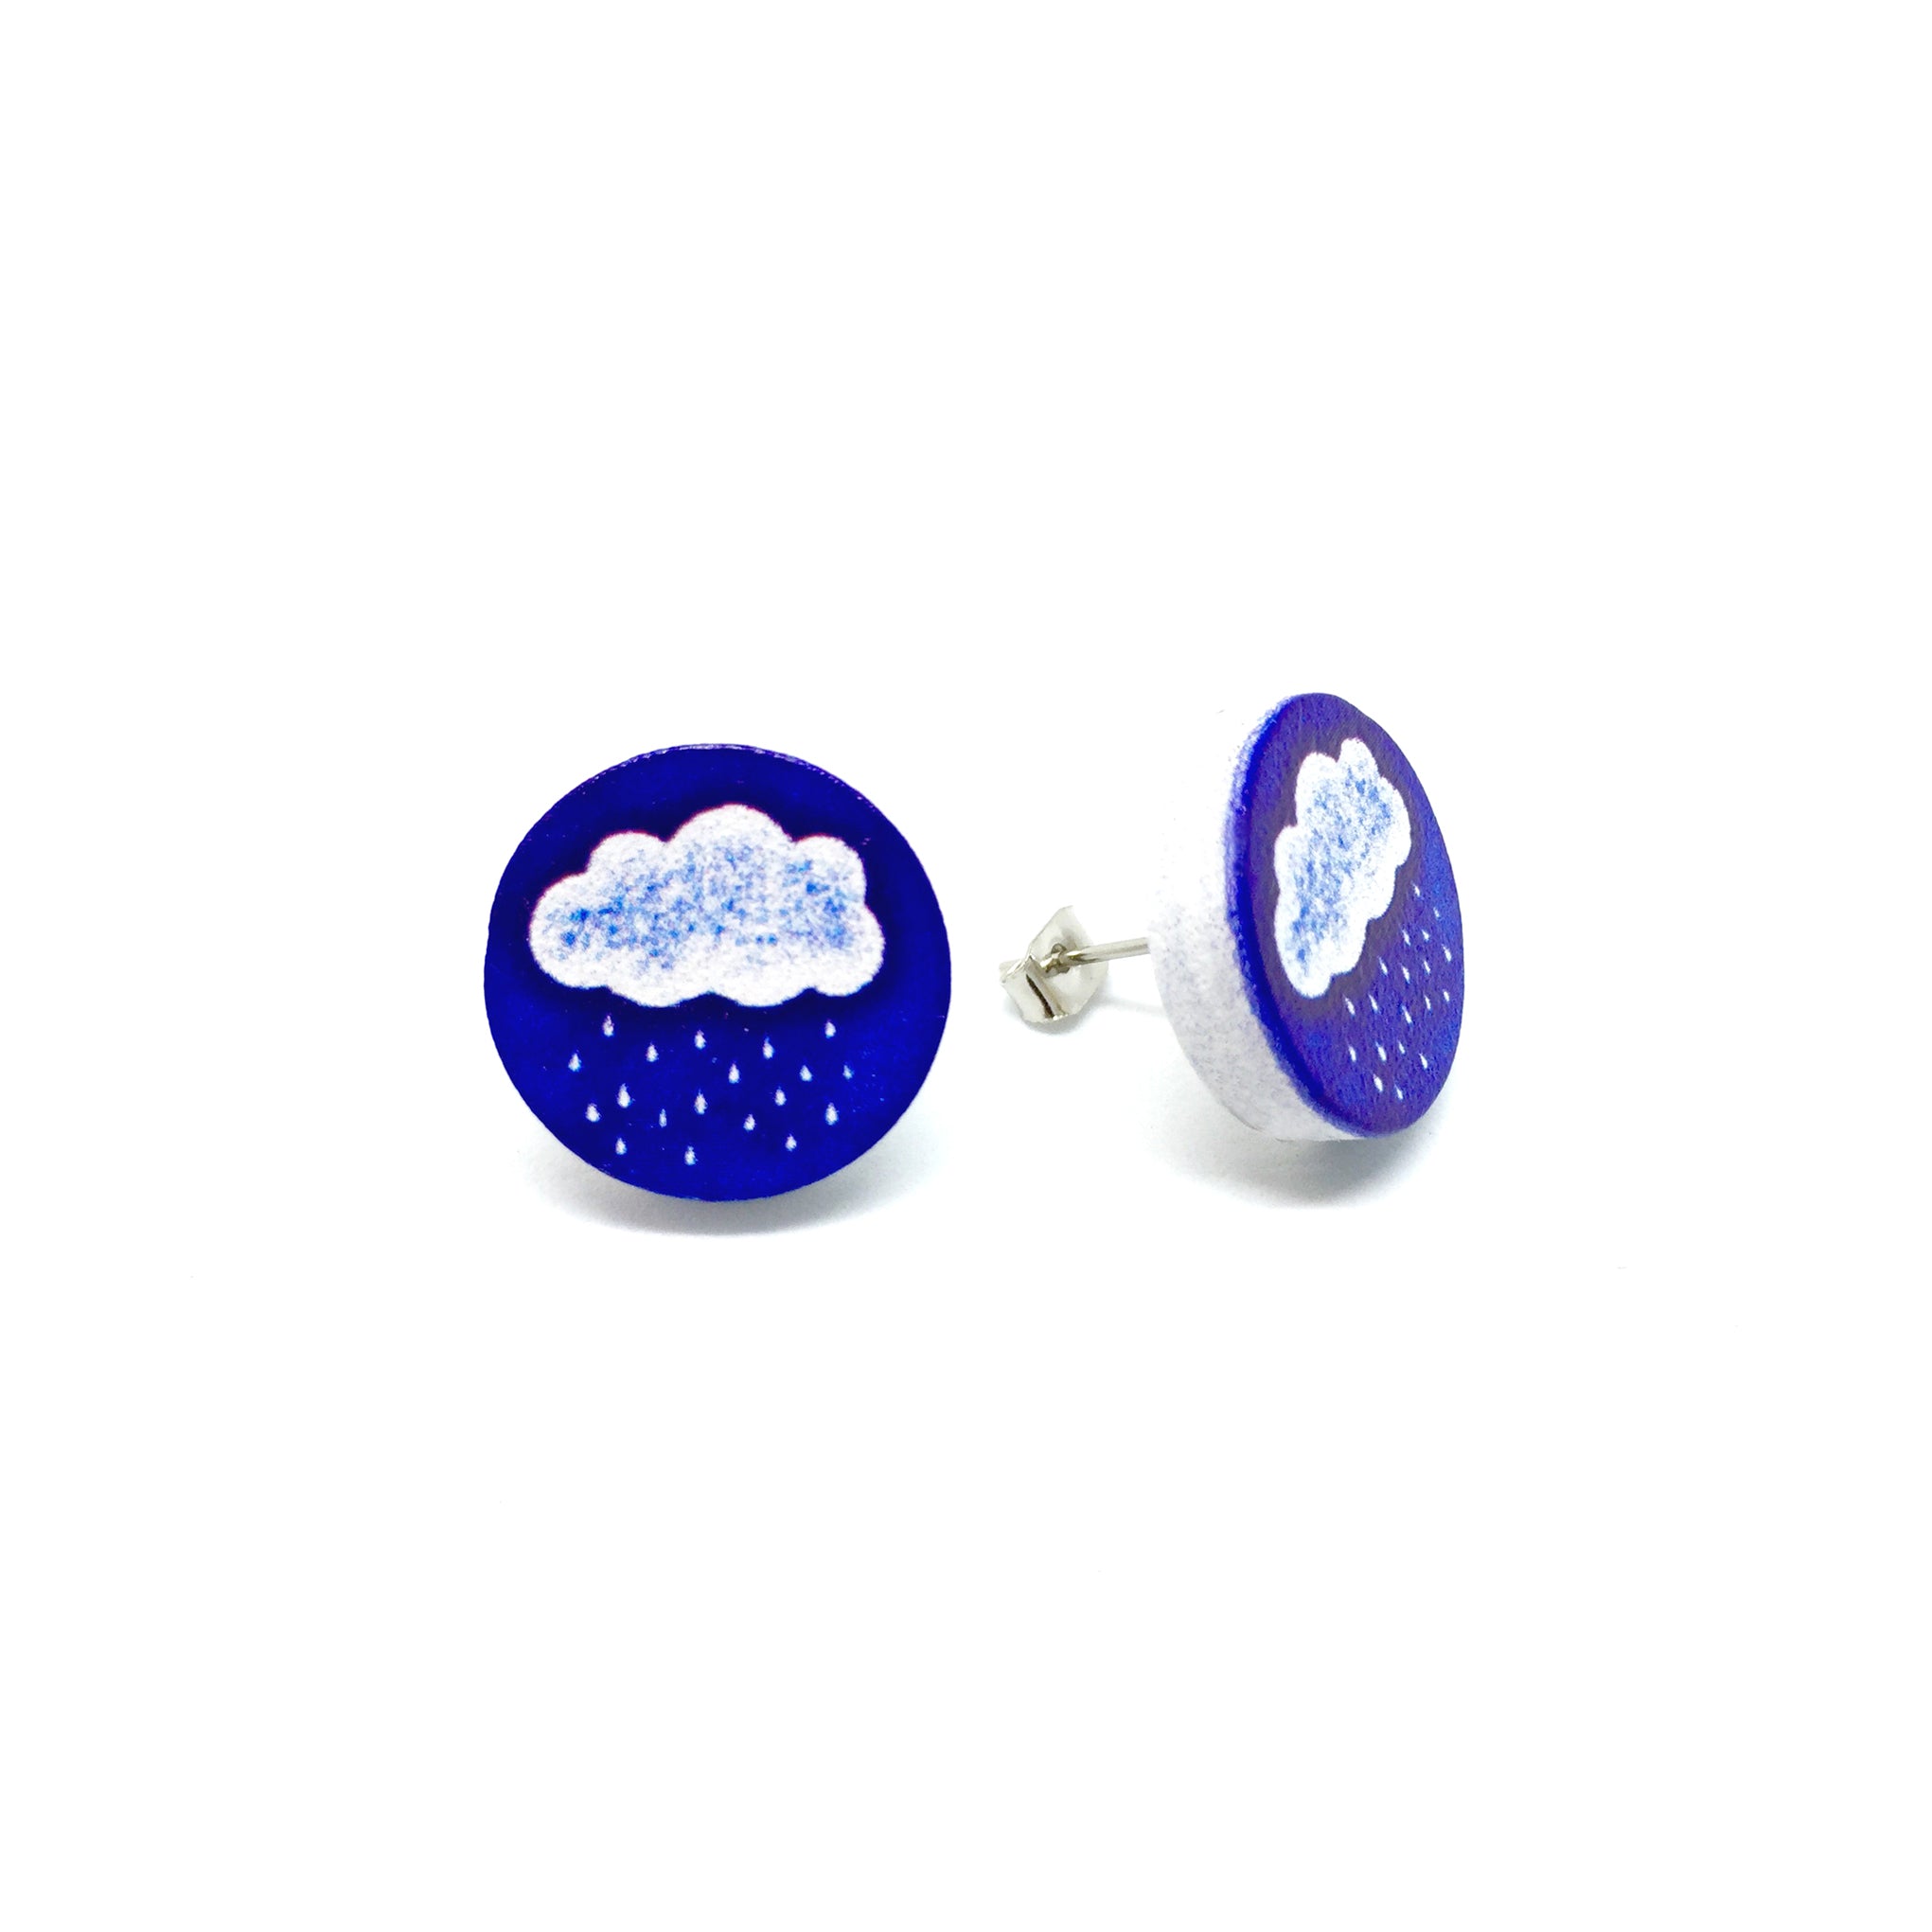 A Blue Raining Day Wooden Earrings - LM